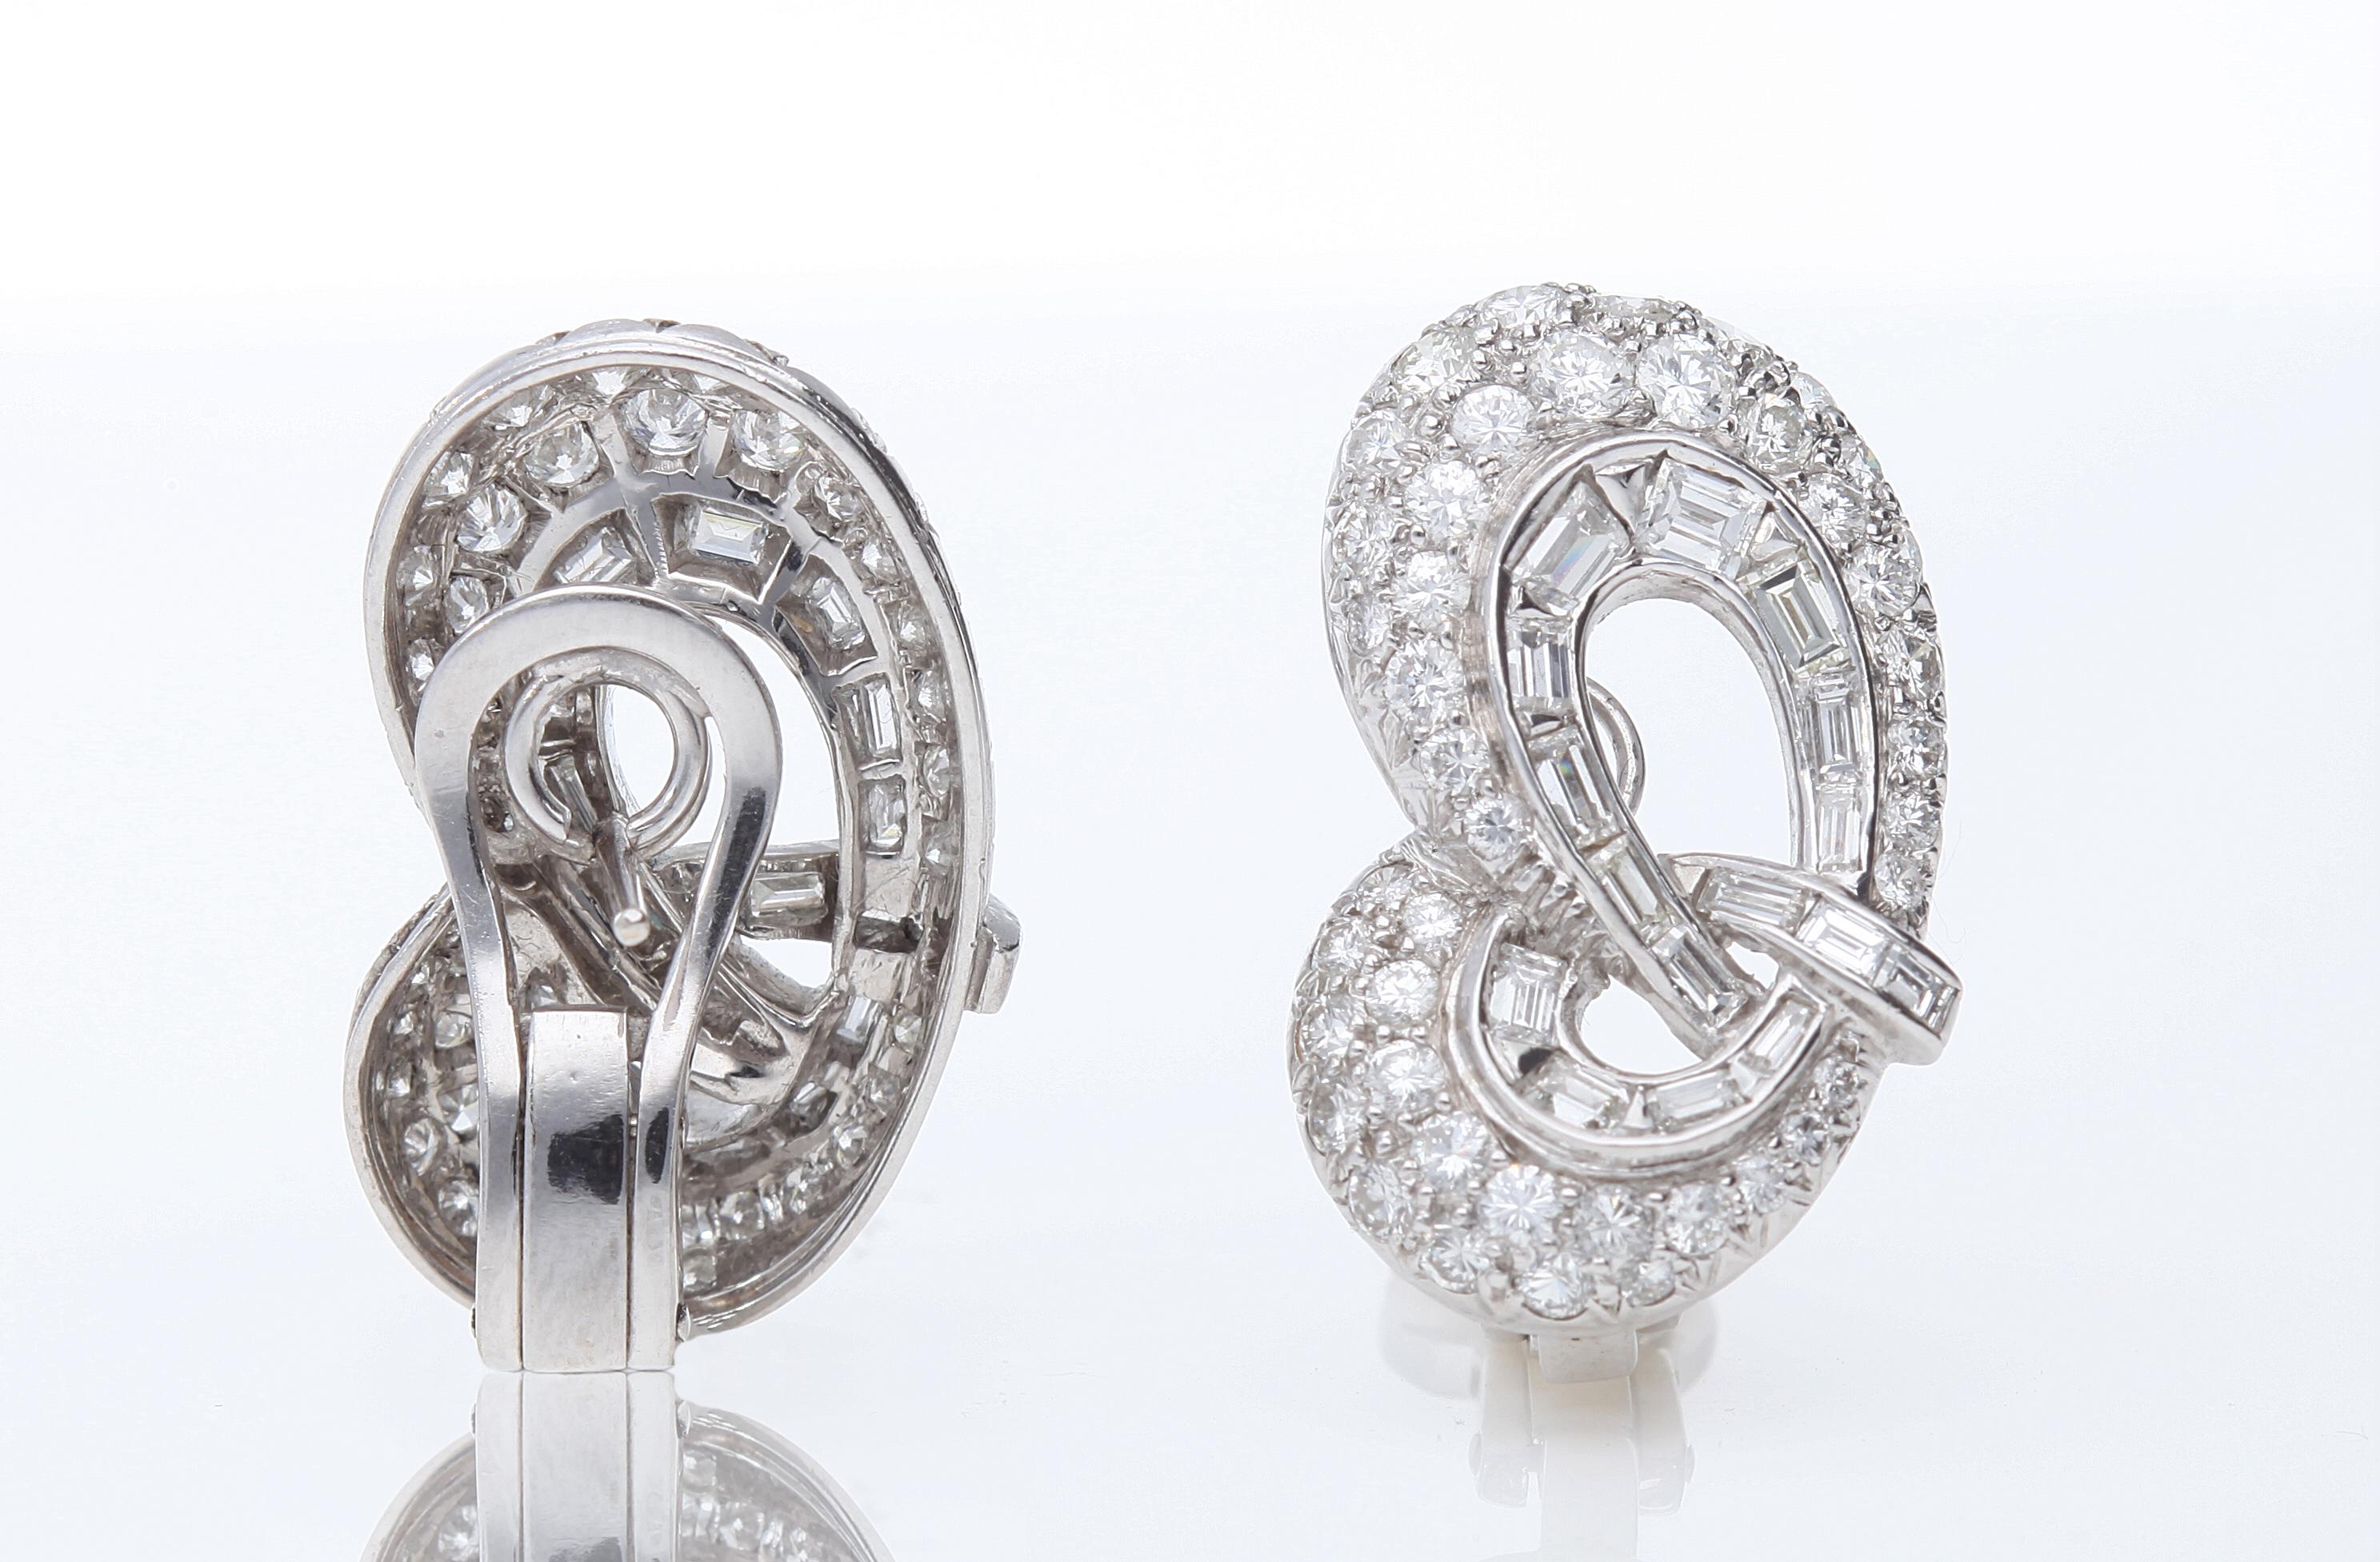 Liberty period earrings with approx. 6.00 ct of Brilliant and baguette-cut diamonds.
Liberty Diamond Earrings (1920)
Earrings with clips and pin.
Diamond weight: about Carat 6.00
Cut Diamond round and baguette.
Earrings with a small modification (at